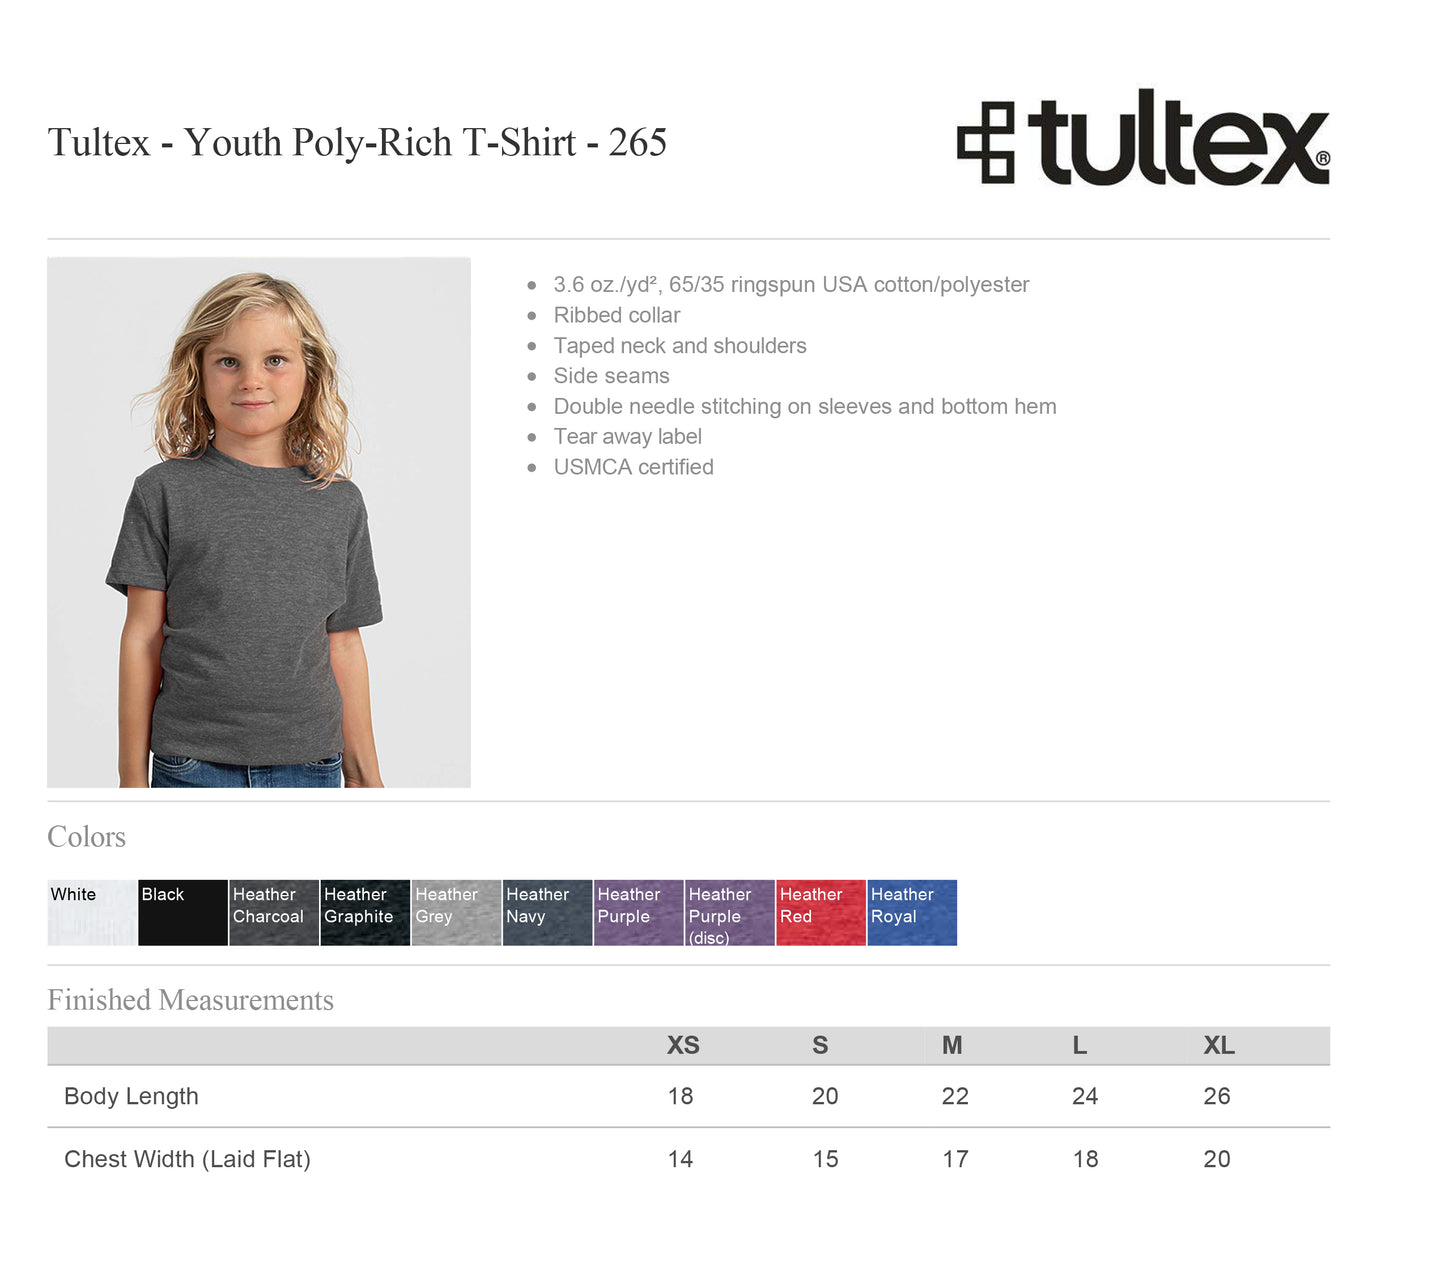 Tultex 265 - Youth Poly-Rich T-Shirt